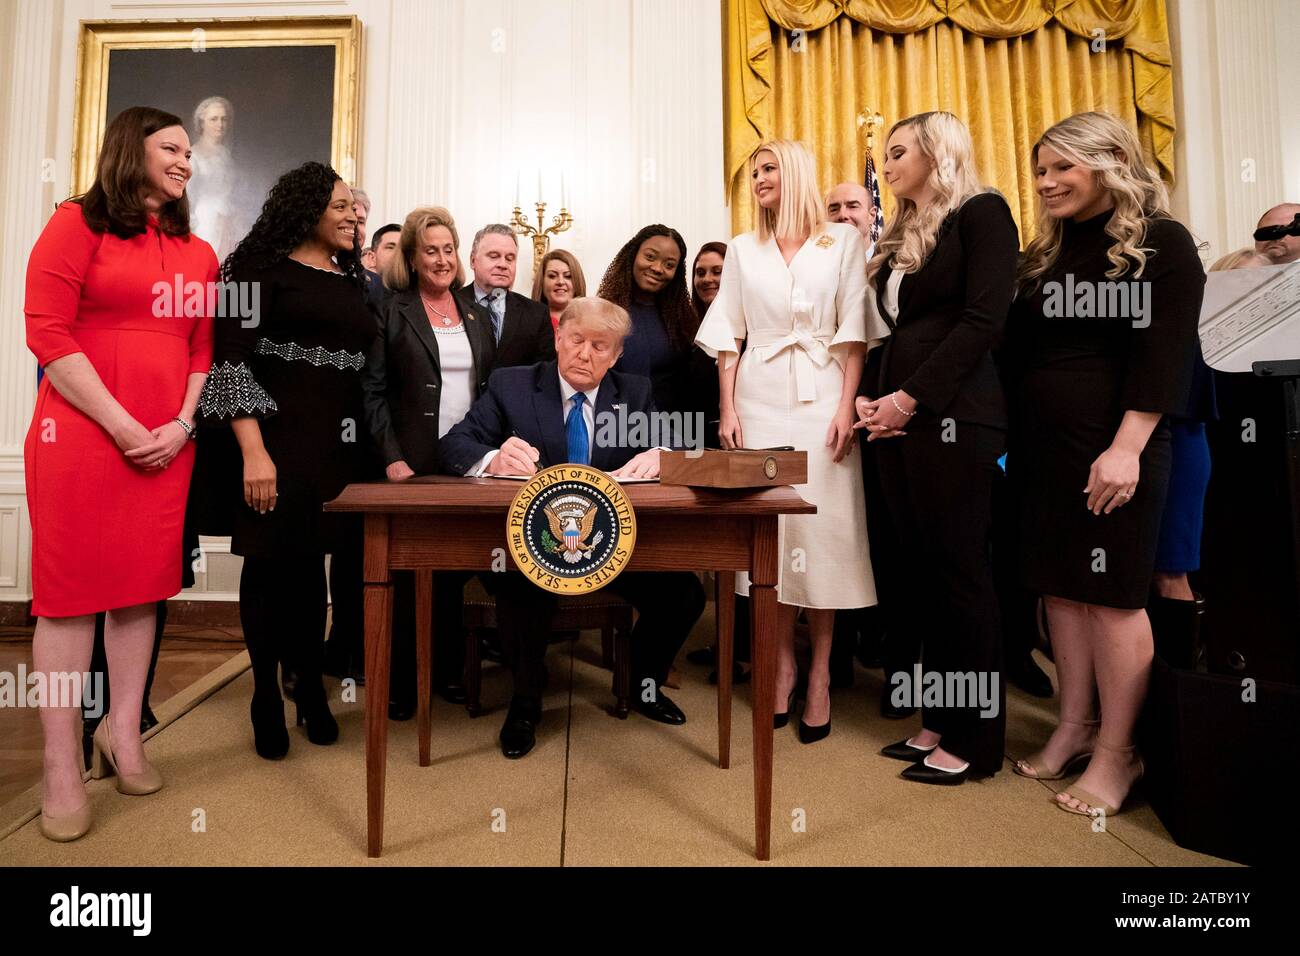 Washington, United States Of America. 31st Jan, 2020. Washington, United States of America. 31 January, 2020. U.S President Donald Trump, surrounded by survivors, officials and his daughter Ivanka Trump, right, signs an executive order to help combat human trafficking during a ceremony in the East Room of the White House January 31, 2020 in Washington, DC. The event took place following the White House Summit on Human Trafficking in honor of the 20th Anniversary of the Trafficking Victims Protection Act. Credit: Tia Dufour/White House Photo/Alamy Live News Stock Photo